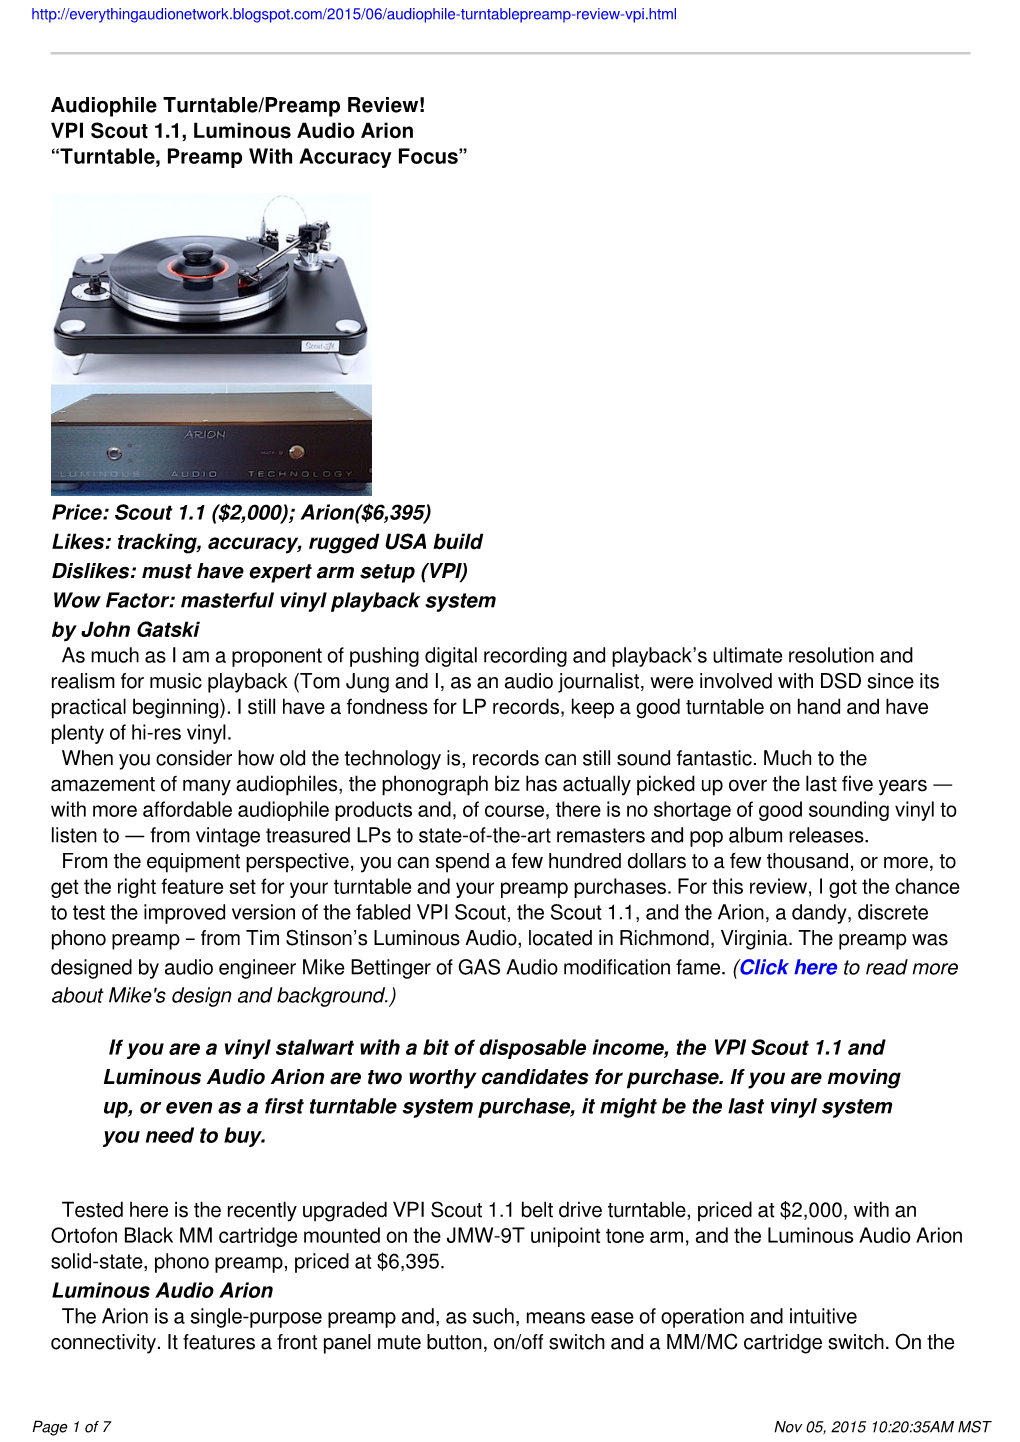 Audiophile Turntable/Preamp Review! VPI Scout 1.1, Luminous Audio Arion “Turntable, Preamp with Accuracy Focus”